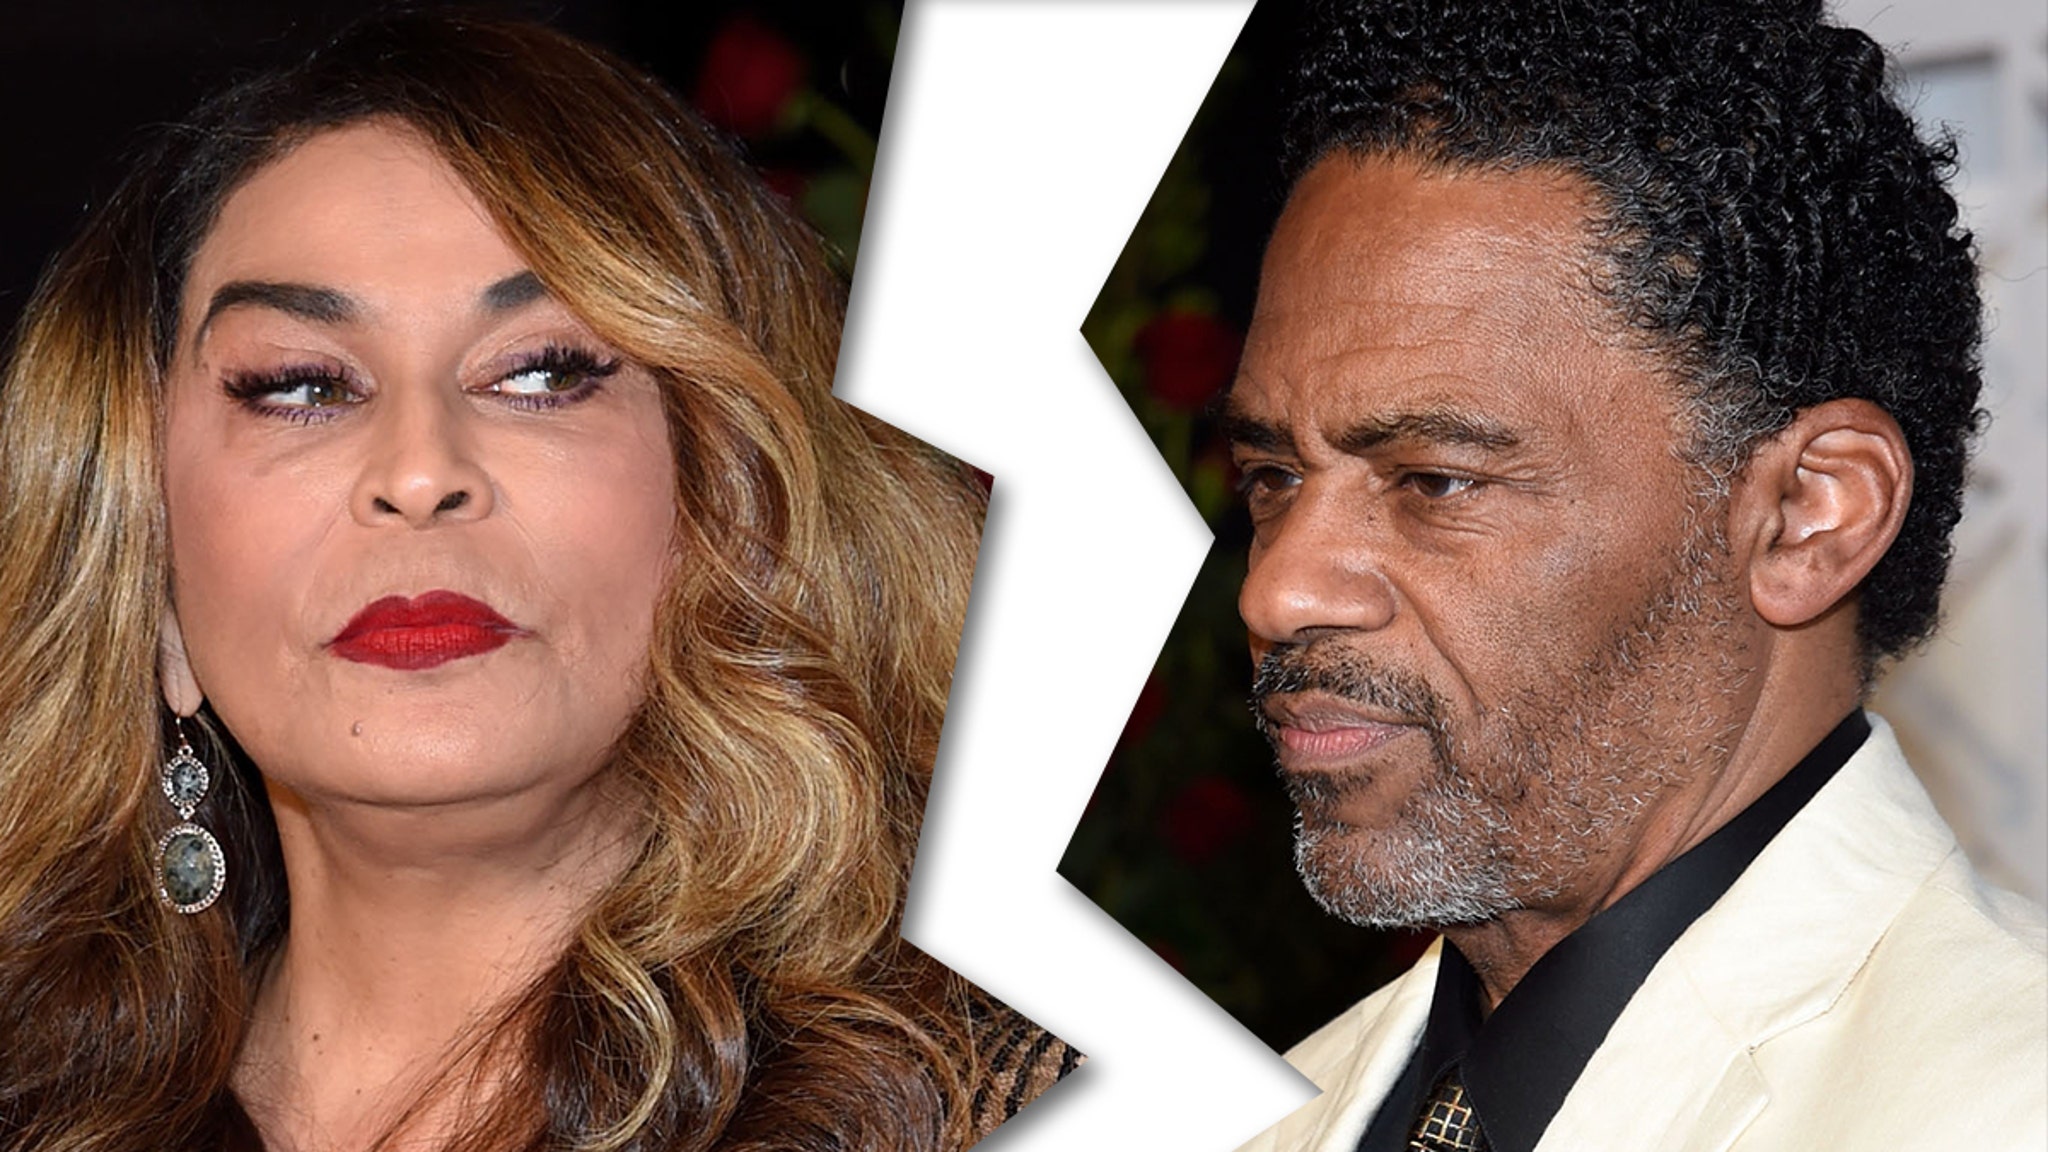 BEYONCE MOM SHOCKS FANS WITH DIVORCE FILING FROM ACTOR RICHARD LAWSON 11